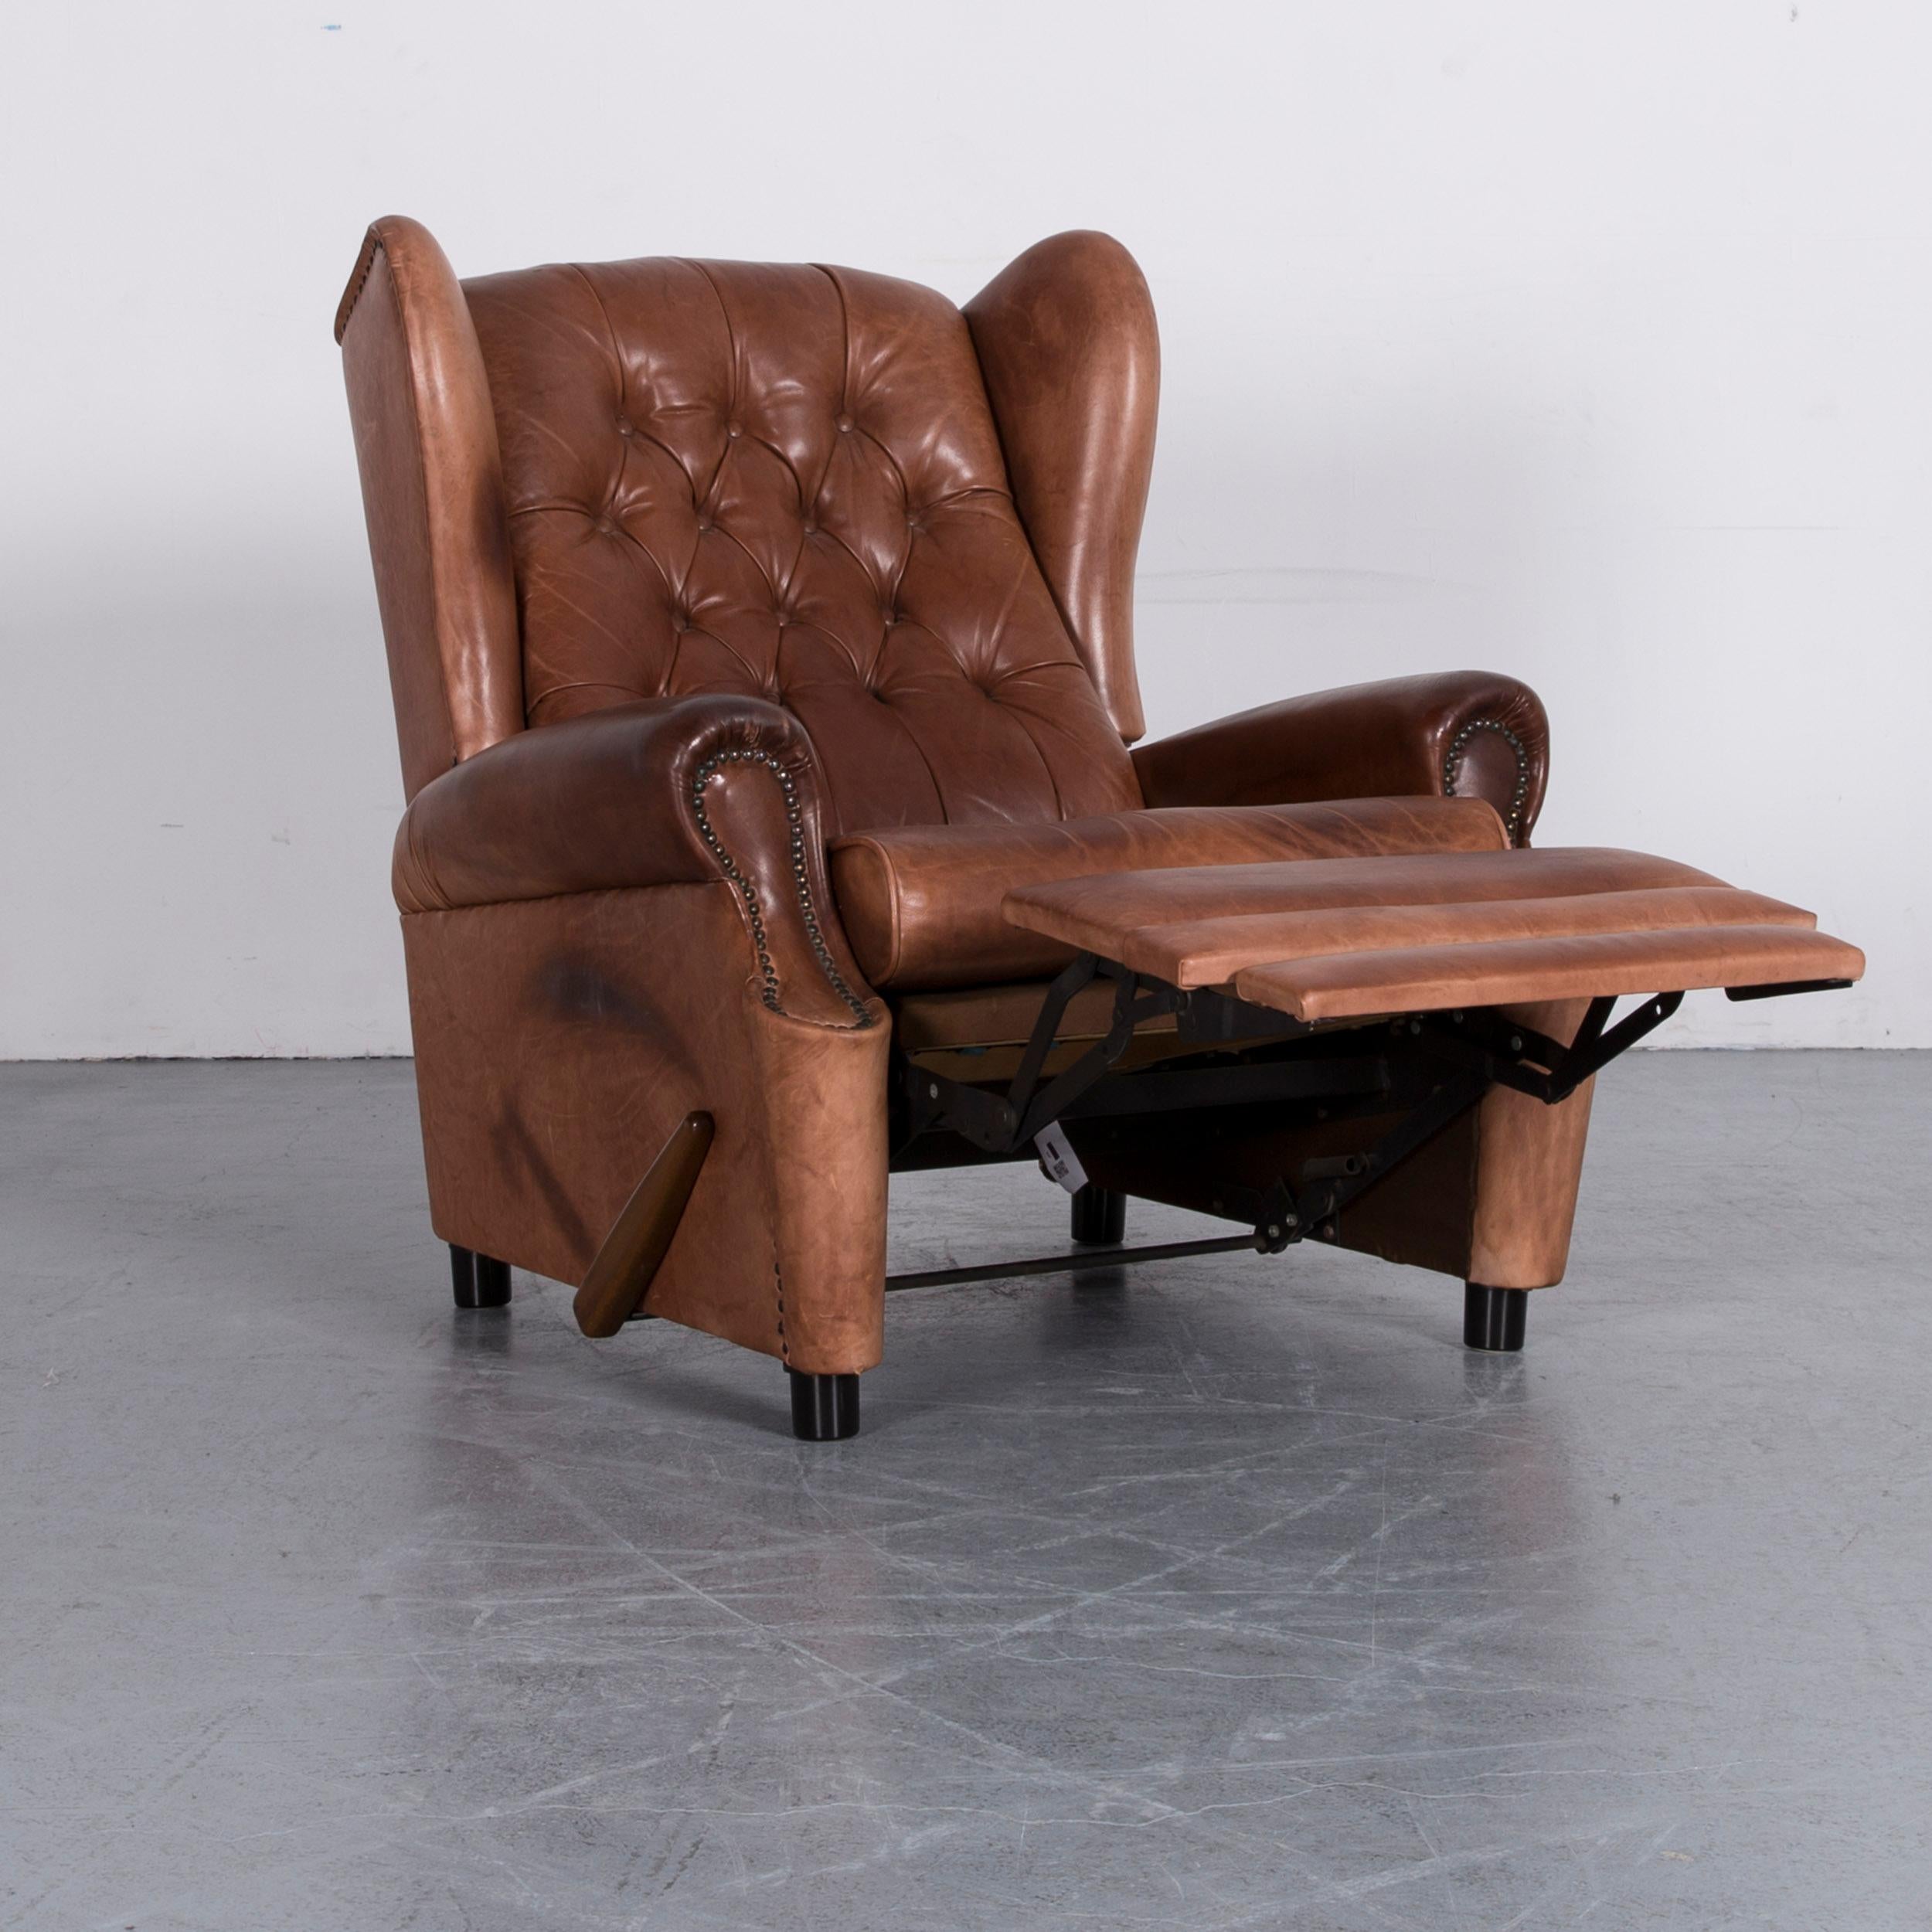 British Chesterfield Leather Armchair Brown One-Seat Vintage Retro with Relax Function